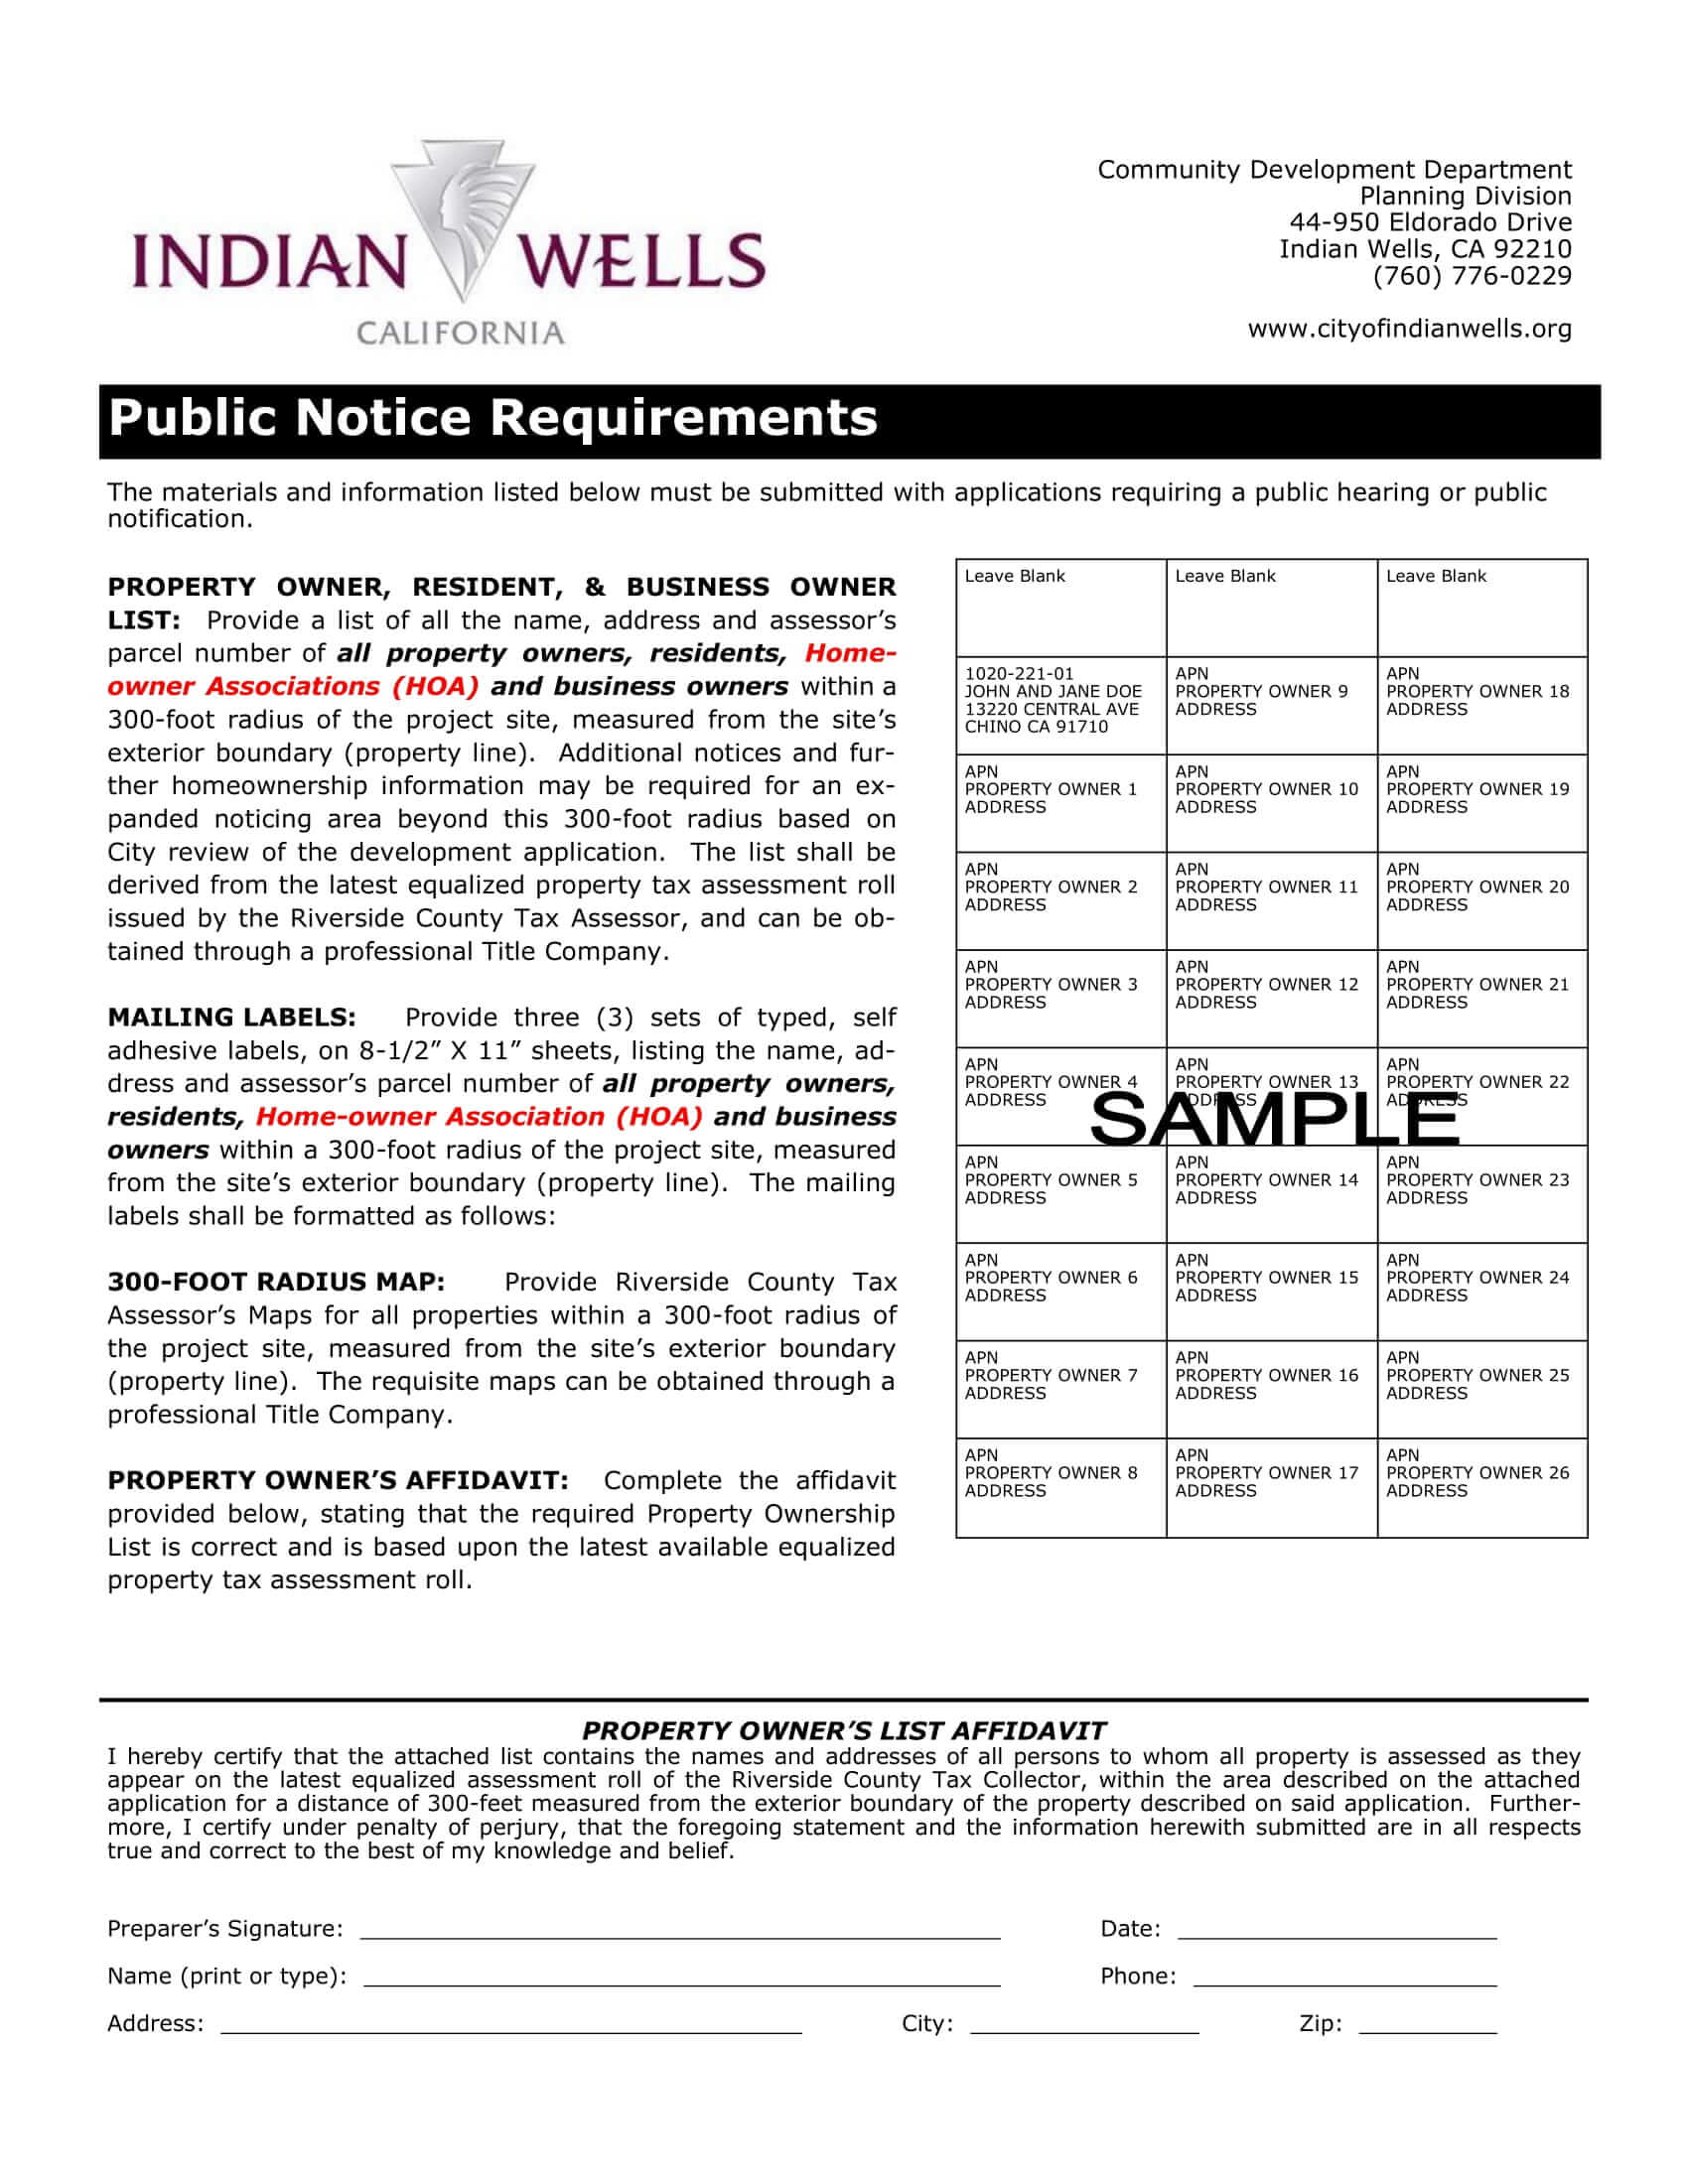 Indian Wells Public Notice Requirements. Property Owner, Resident & Business Owner List within 300 foot radius of the project site.